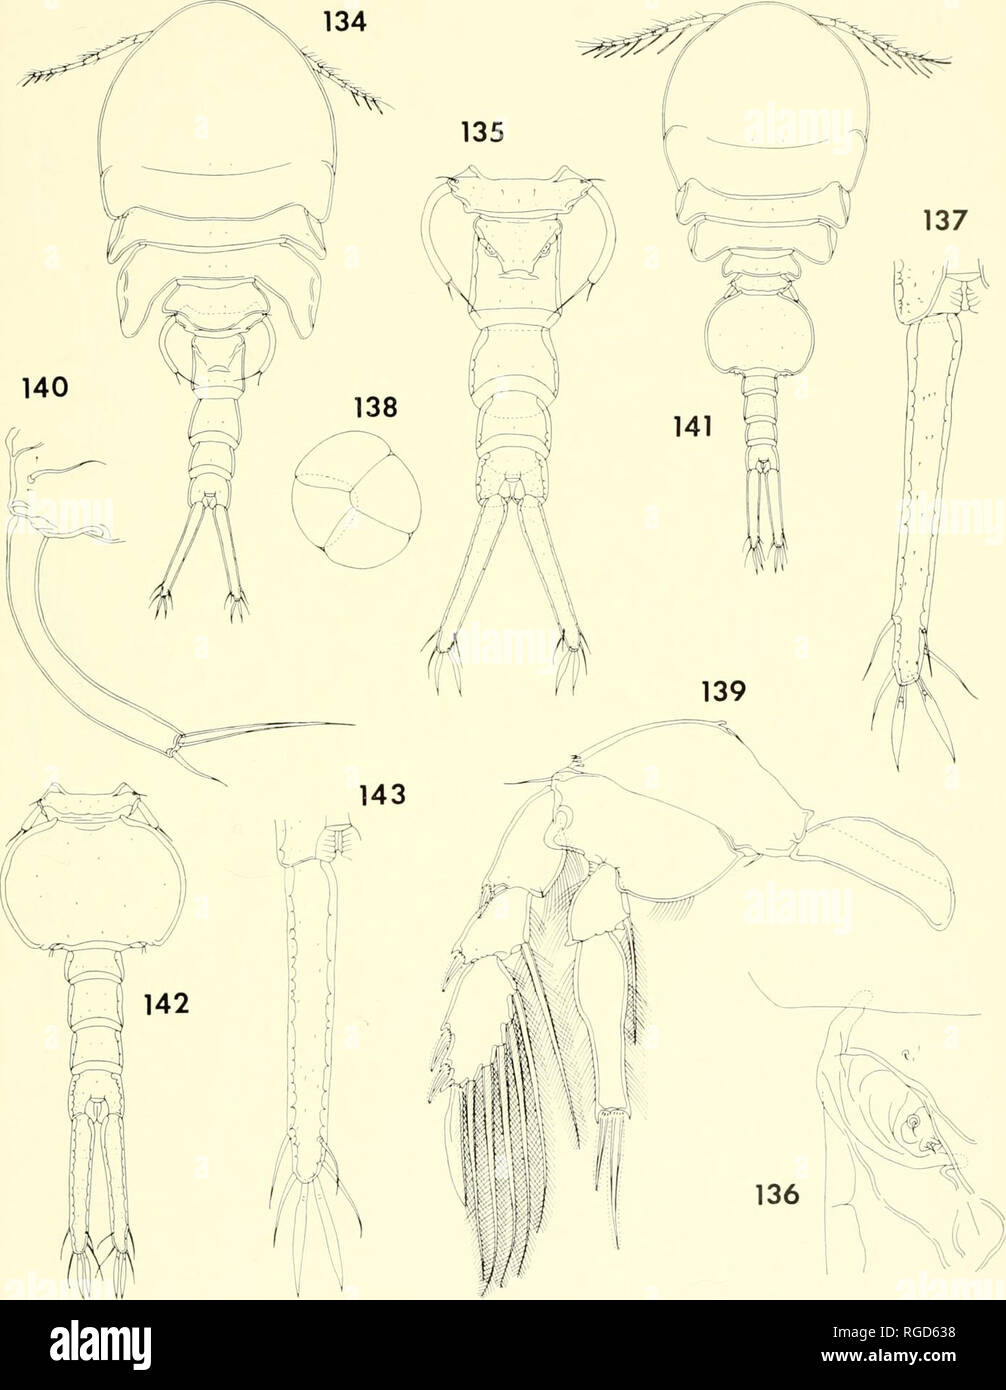 . Bulletin of the Museum of Comparative Zoology at Harvard College. Zoology. CoPEPODS FROM CoRALS IN MADAGASCAR • Humcs and Ho 399. Figures 134-140. Lichomolgus geminus n. sp., female. 134, body, dorsal (A); 135, urosome, dorsal (G); 136, area of attachment of egg sac, dorsal (F); 137, caudal ramus, dorsal (H); 138, egg sac, dorsal (G); 139, leg 4 and intercoxal plate, anterior (E); 140, leg 5, dorsal (E). Figures 141-143. Lichomolgus geminus n. sp., male. 141, body, dorsal (A); 142, urosome, dorsal (G); 143, caudal ramus, dorsal (H).. Please note that these images are extracted from scanned p Stock Photo